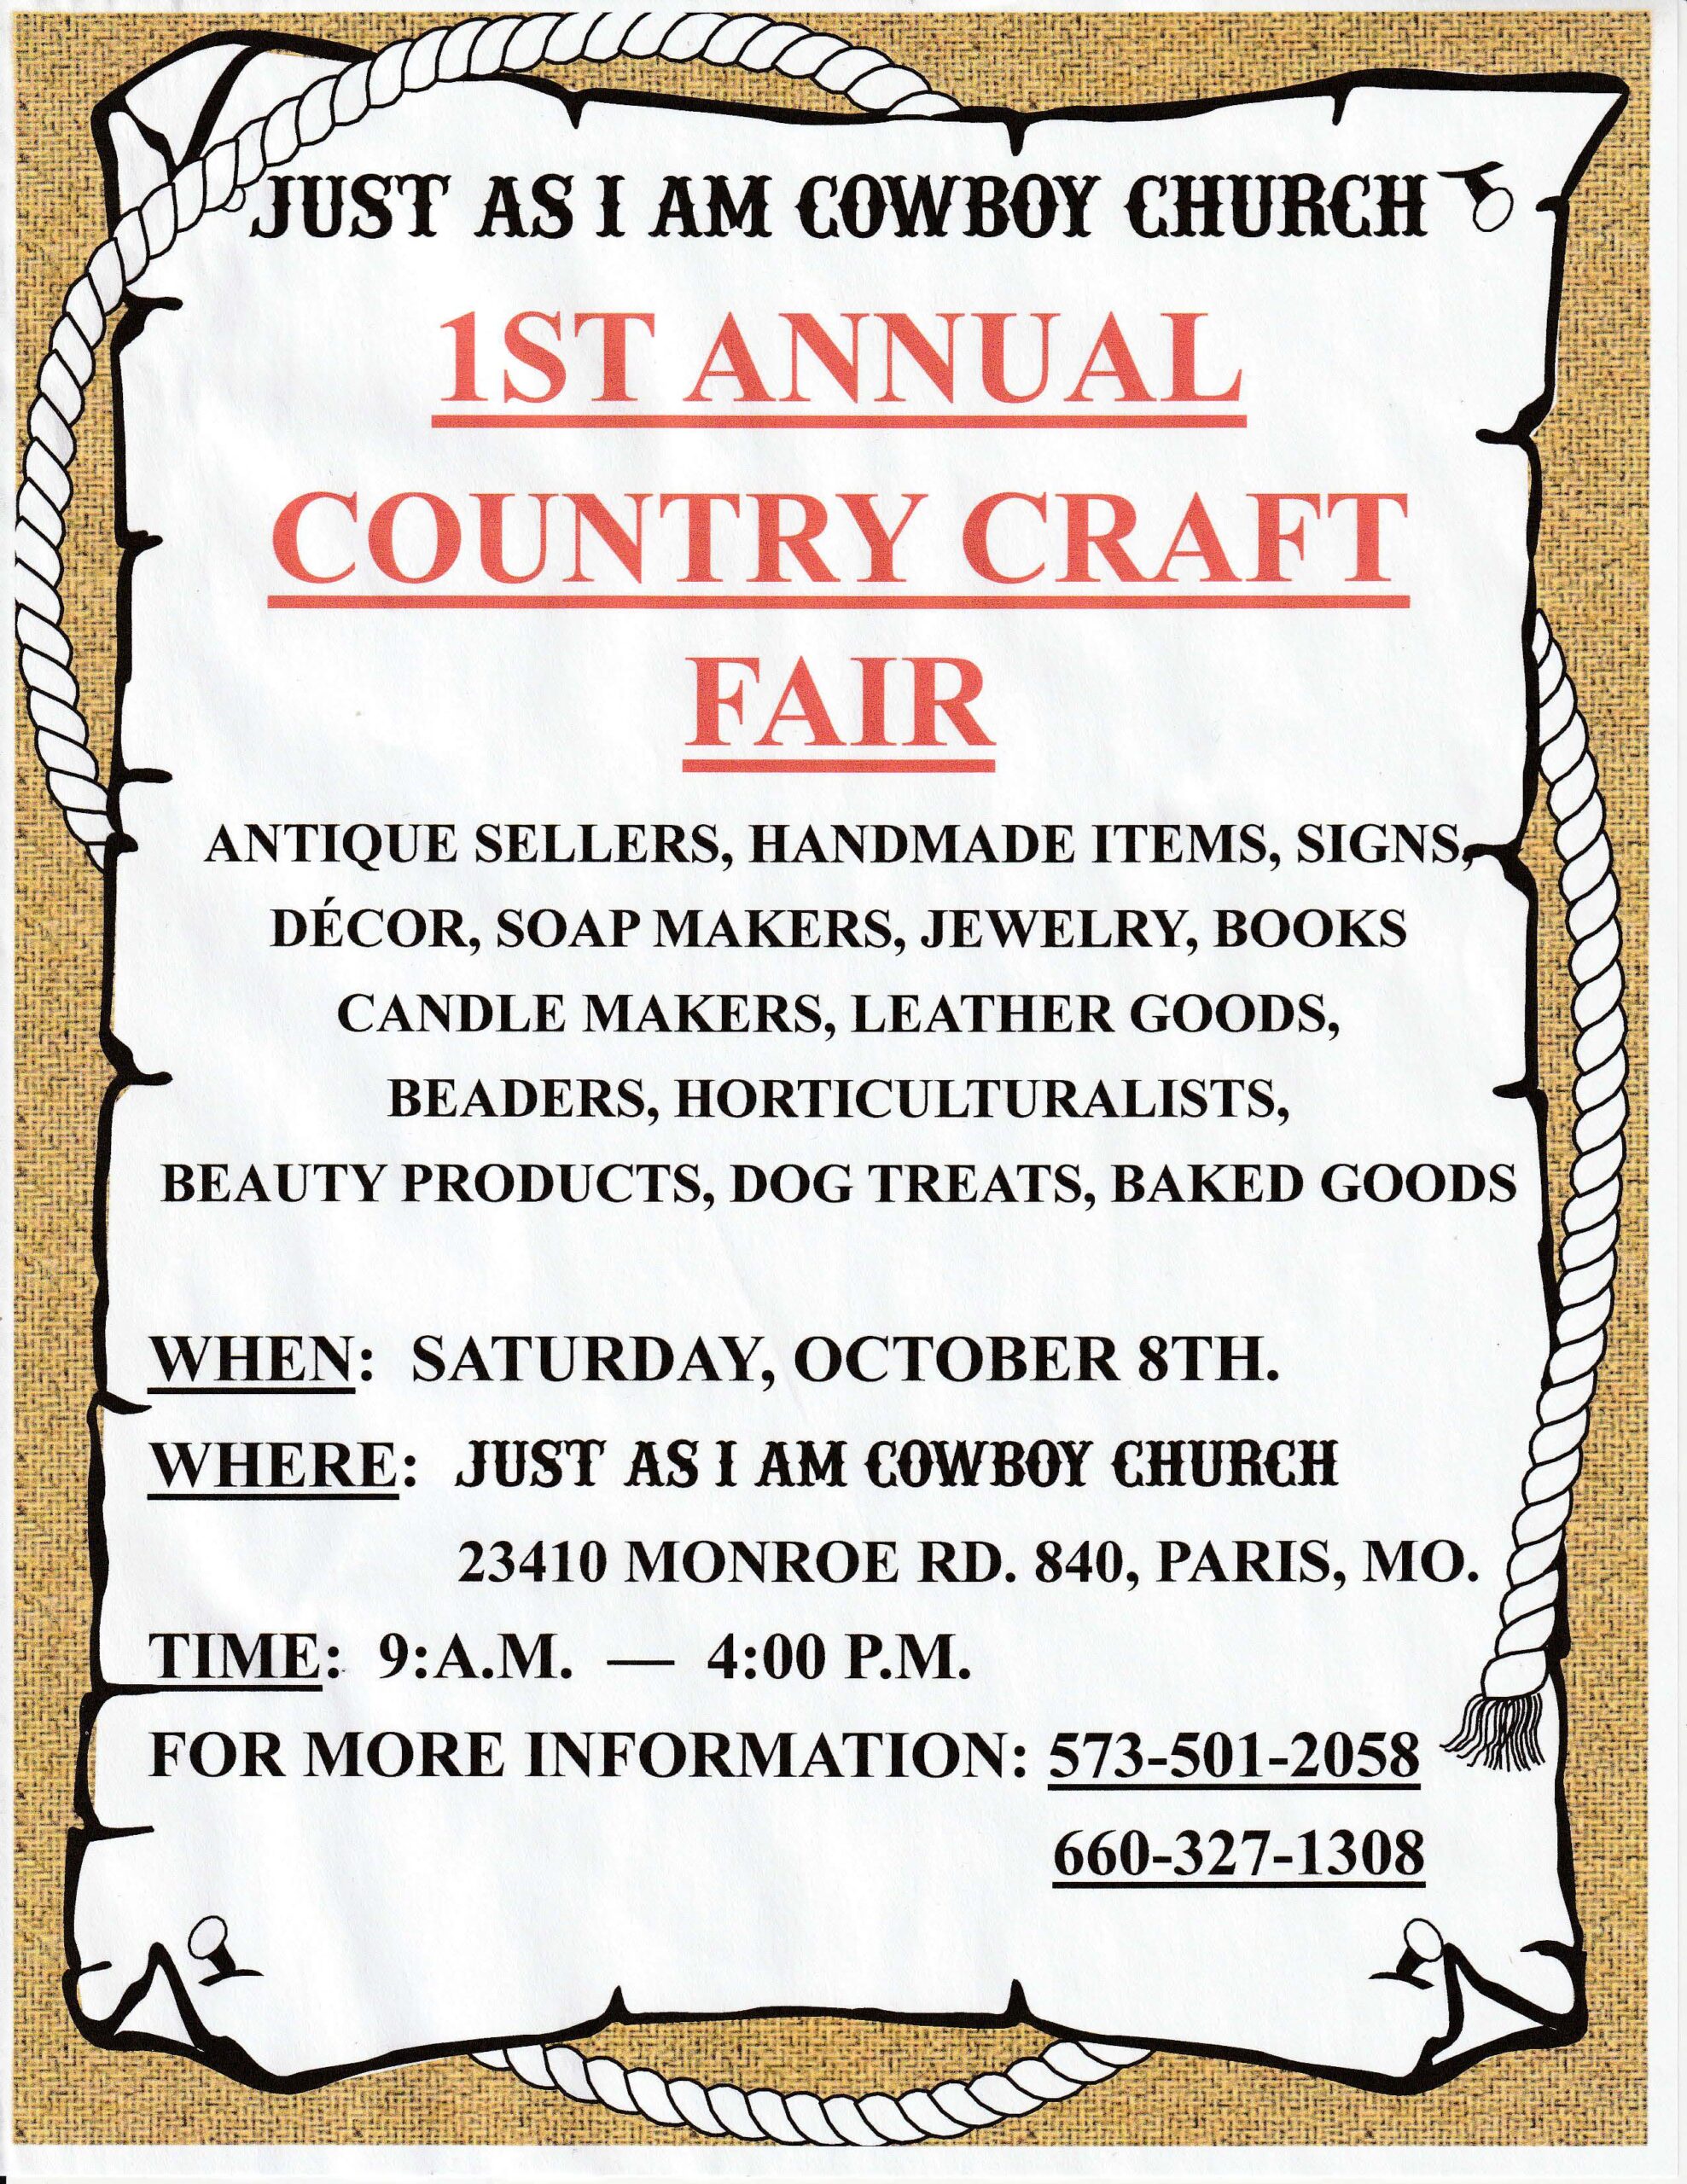 <h1 class="tribe-events-single-event-title">Just As I Am Cowboy Church 1st Annual Country Craft Fair</h1>